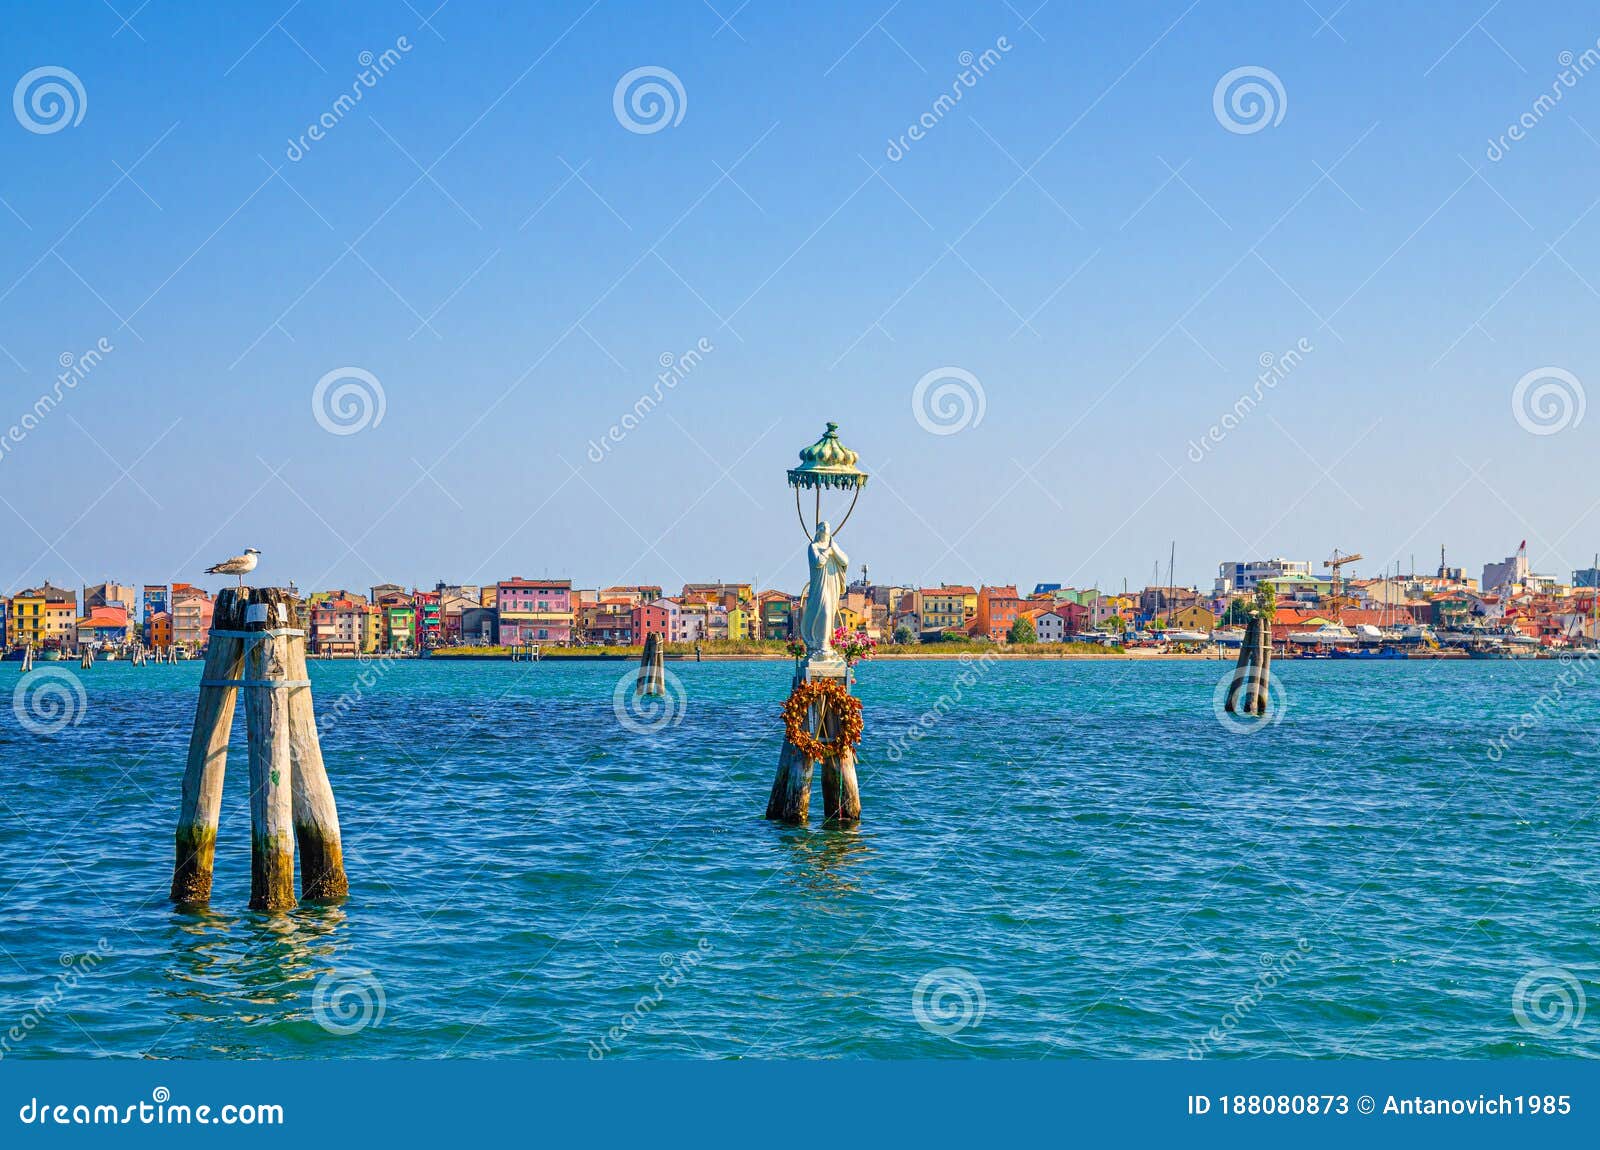 panoramic view of lusenzo lagoon with wooden bricole poles in water and sottomarina town